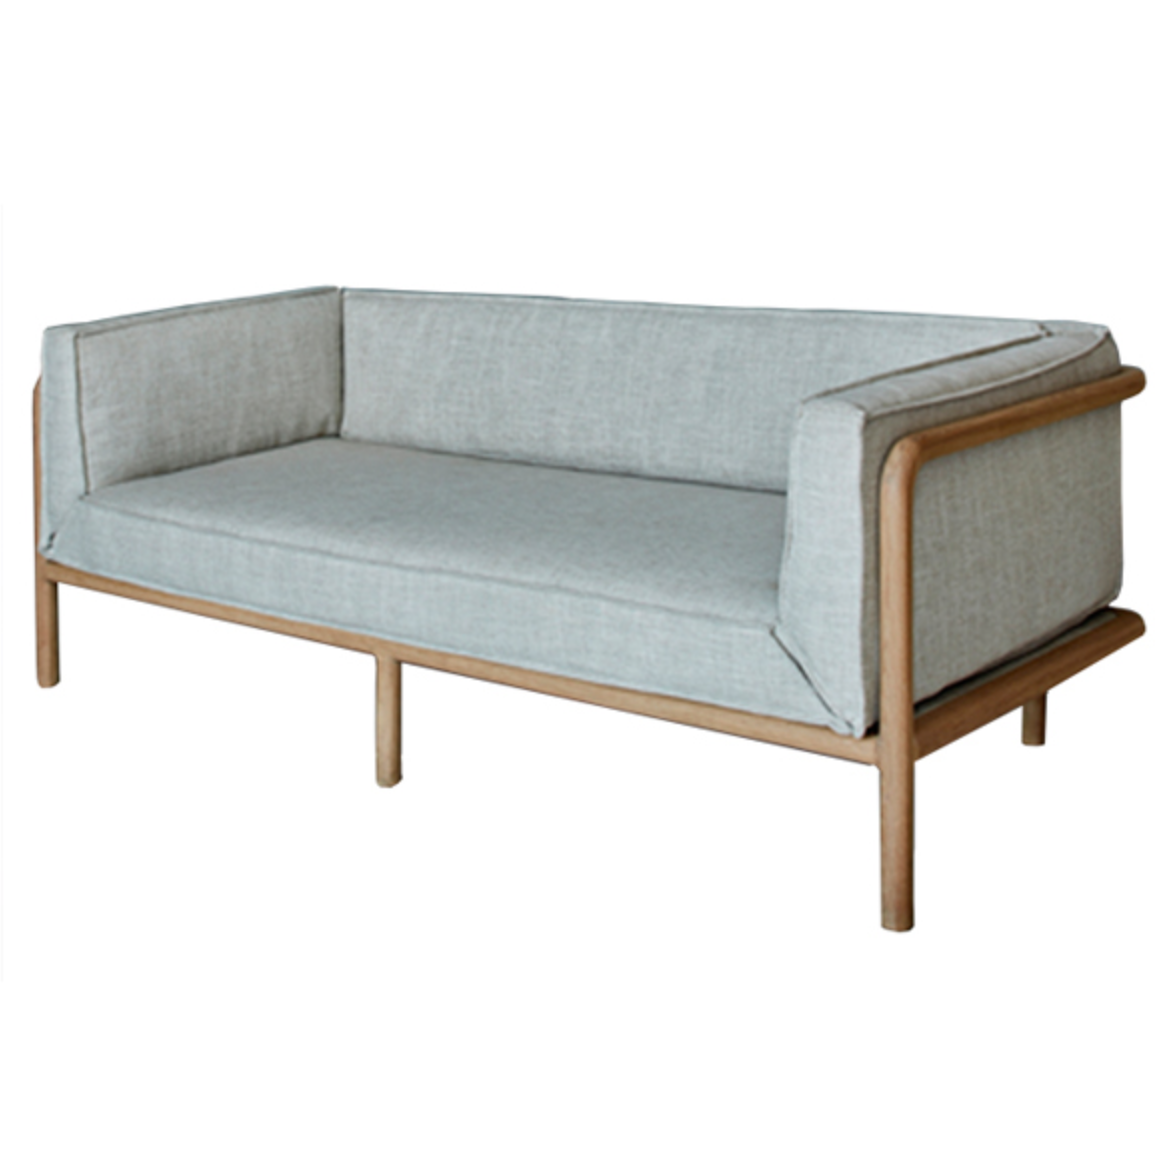 Melike 2 Seater Sofa by Meyer Von Wielligh. Inspired by the stark beauty of the Namibian landscape where Abrie grew up, the Melike chair is an uncomplicated design imbued with a simplicity in both material and detail.